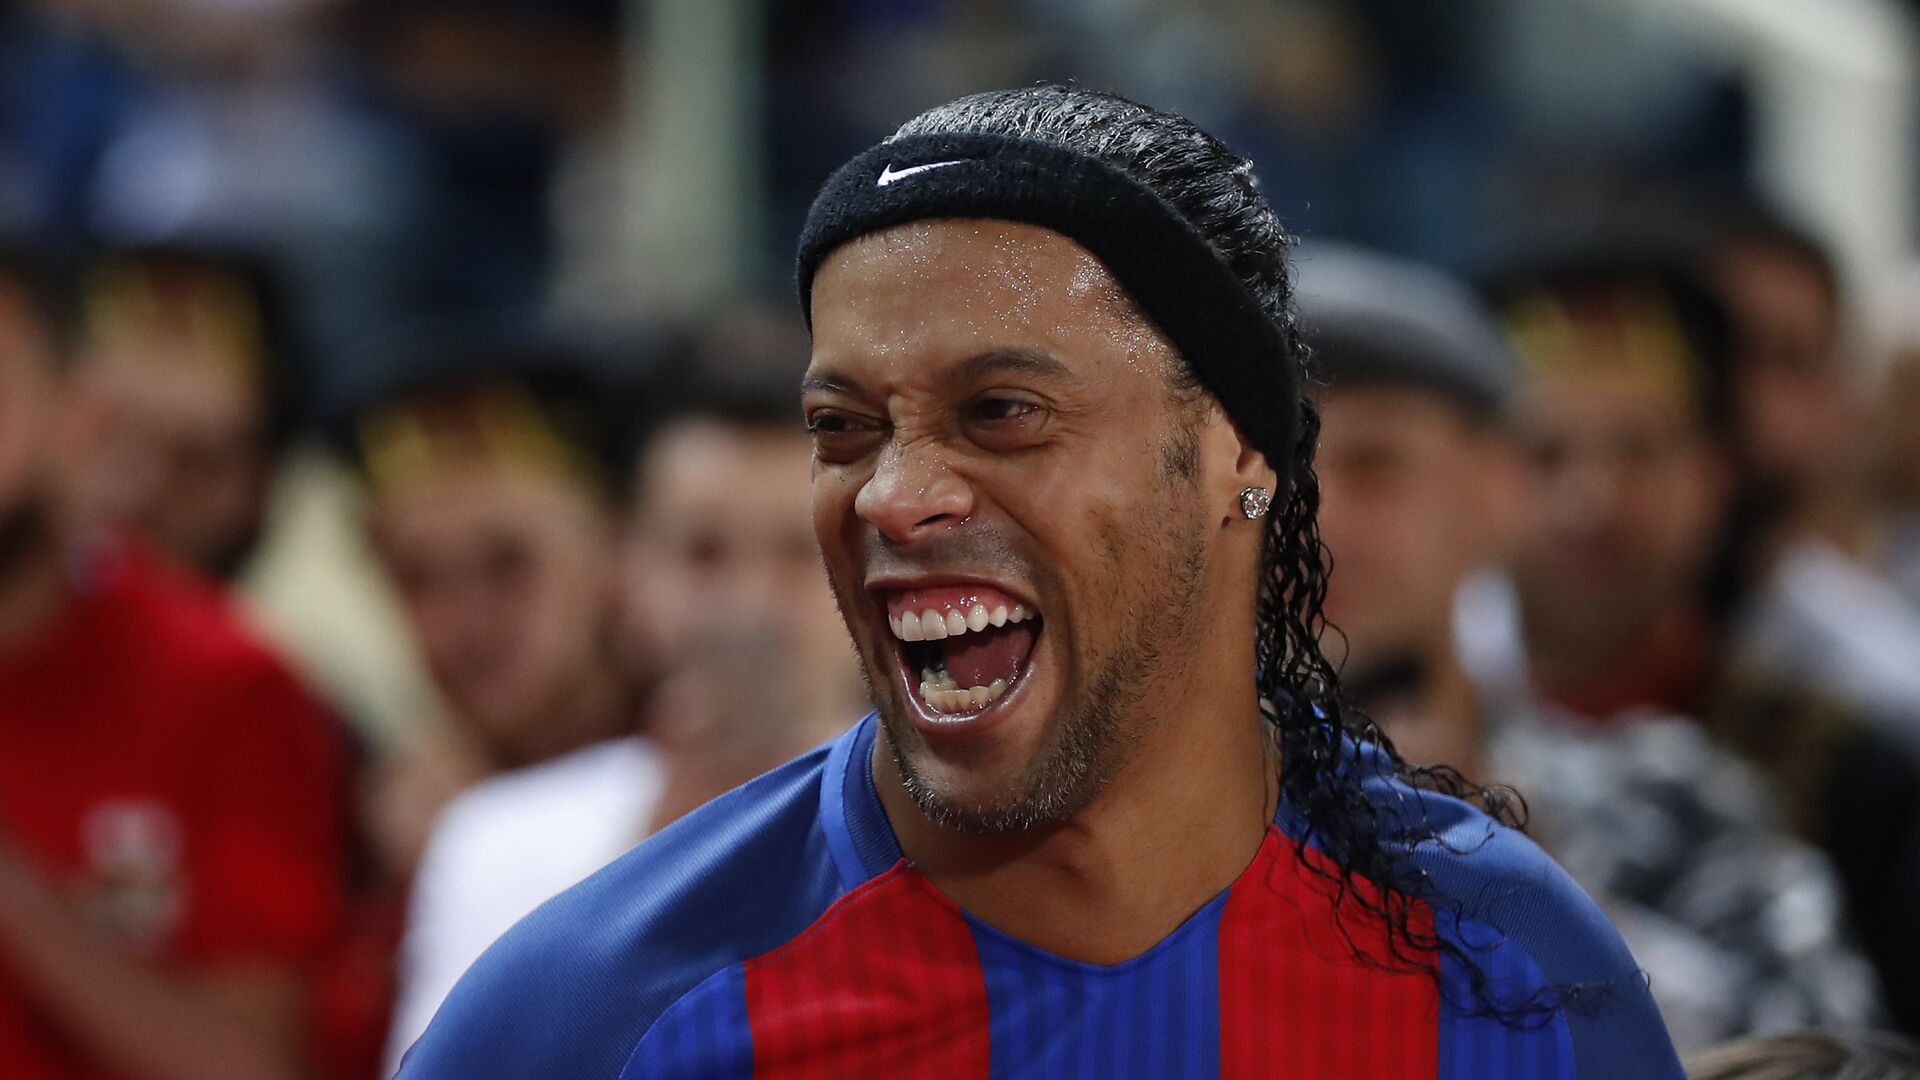 Former FC Barcelona player Ronaldinho, laughs as he enters the stadium during a friendly soccer match between the FC Barcelona and Real Madrid Legends, at the Camille Chamoun Sports City in Beirut, Lebanon, Friday,  - اسپوتنیک افغانستان  , 1920, 31.03.2022